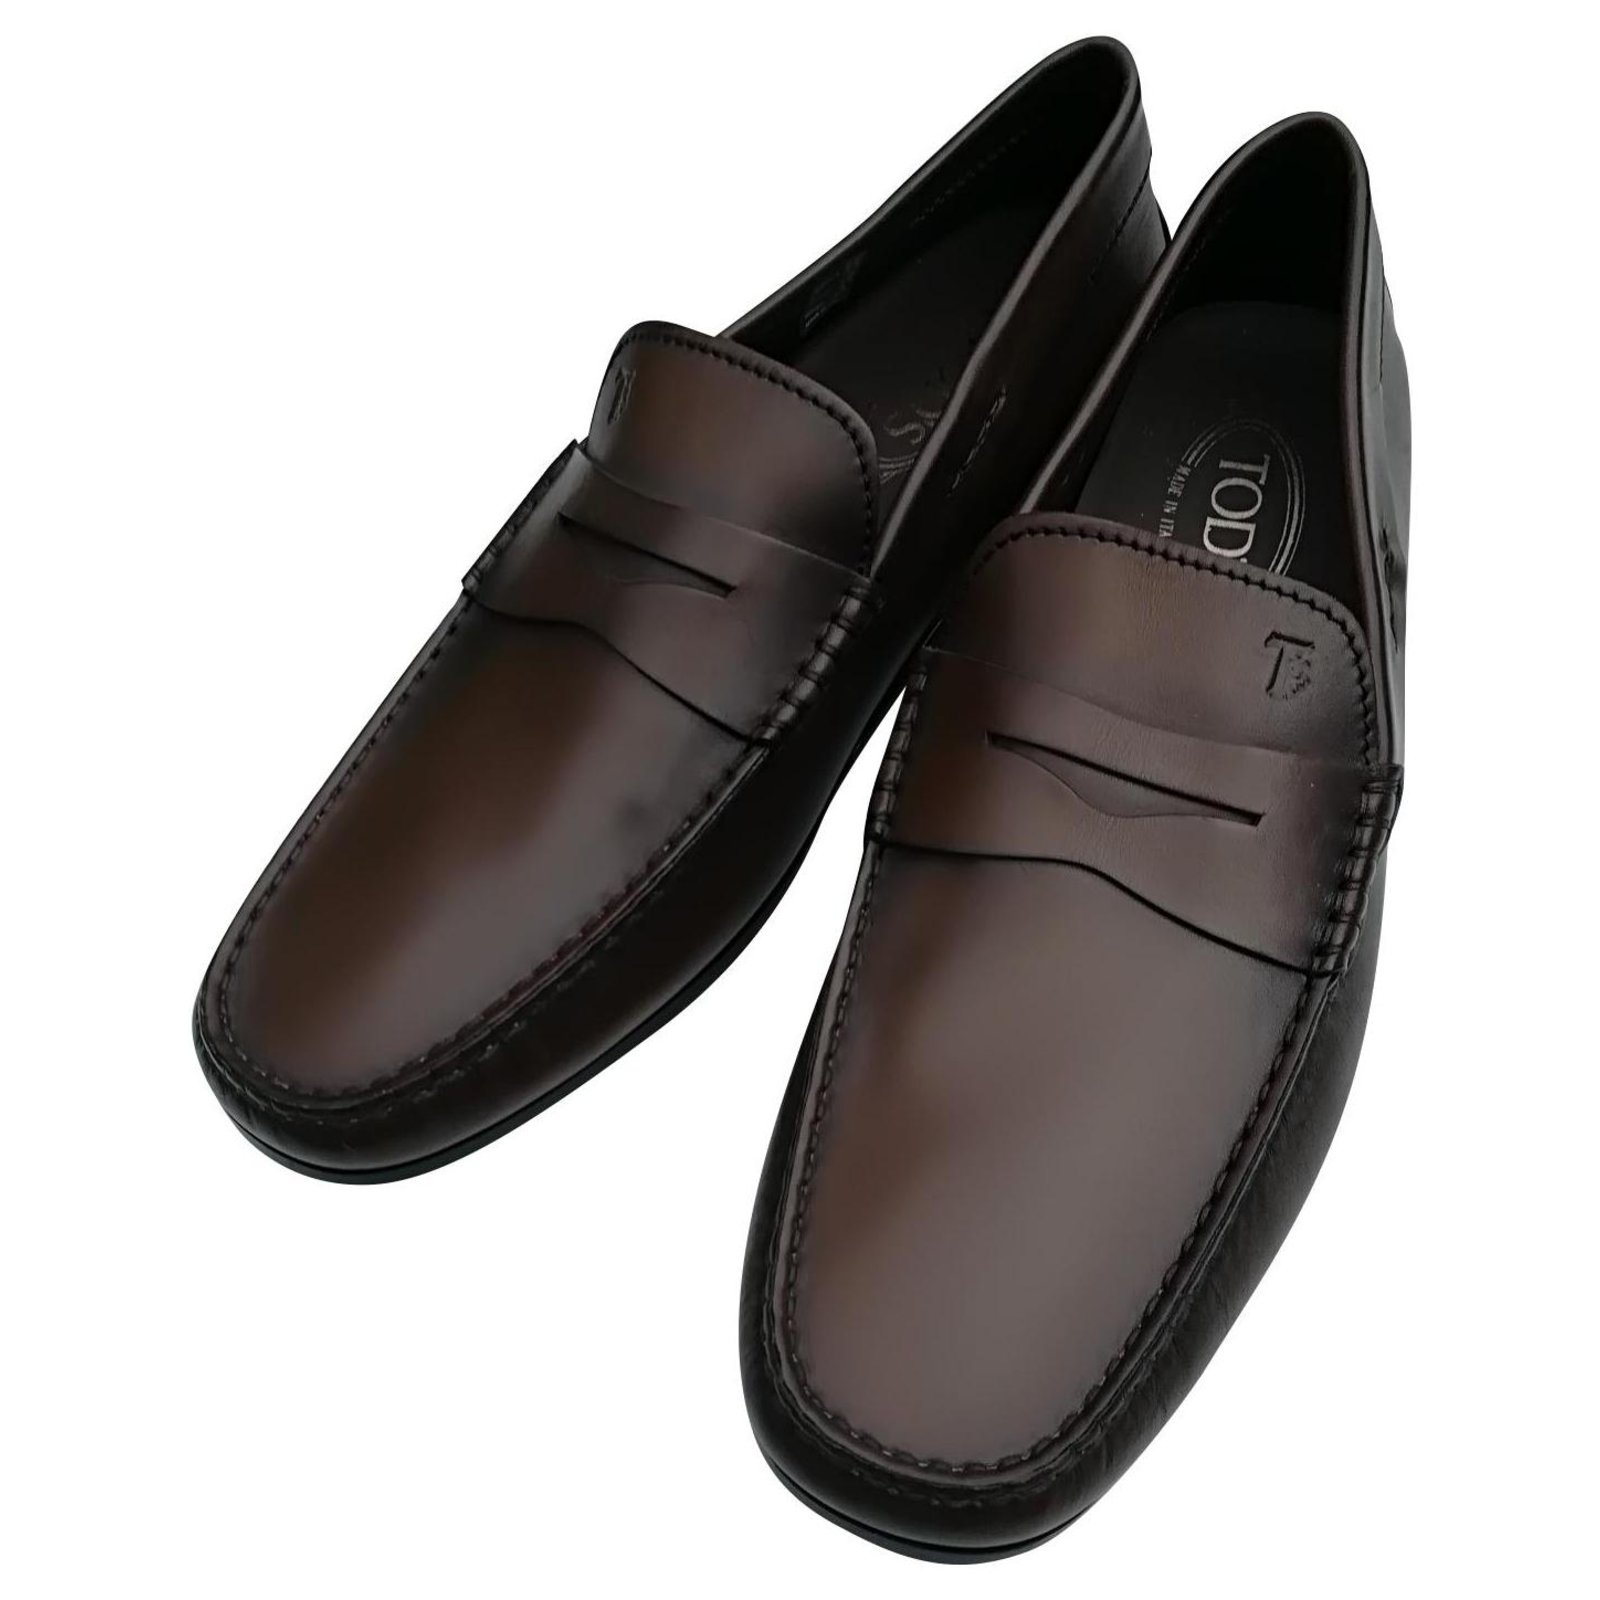 Homme Chaussures Tods Homme Mocassins Tods Homme Mocassins TODS 43 marron Mocassins Tods Homme 